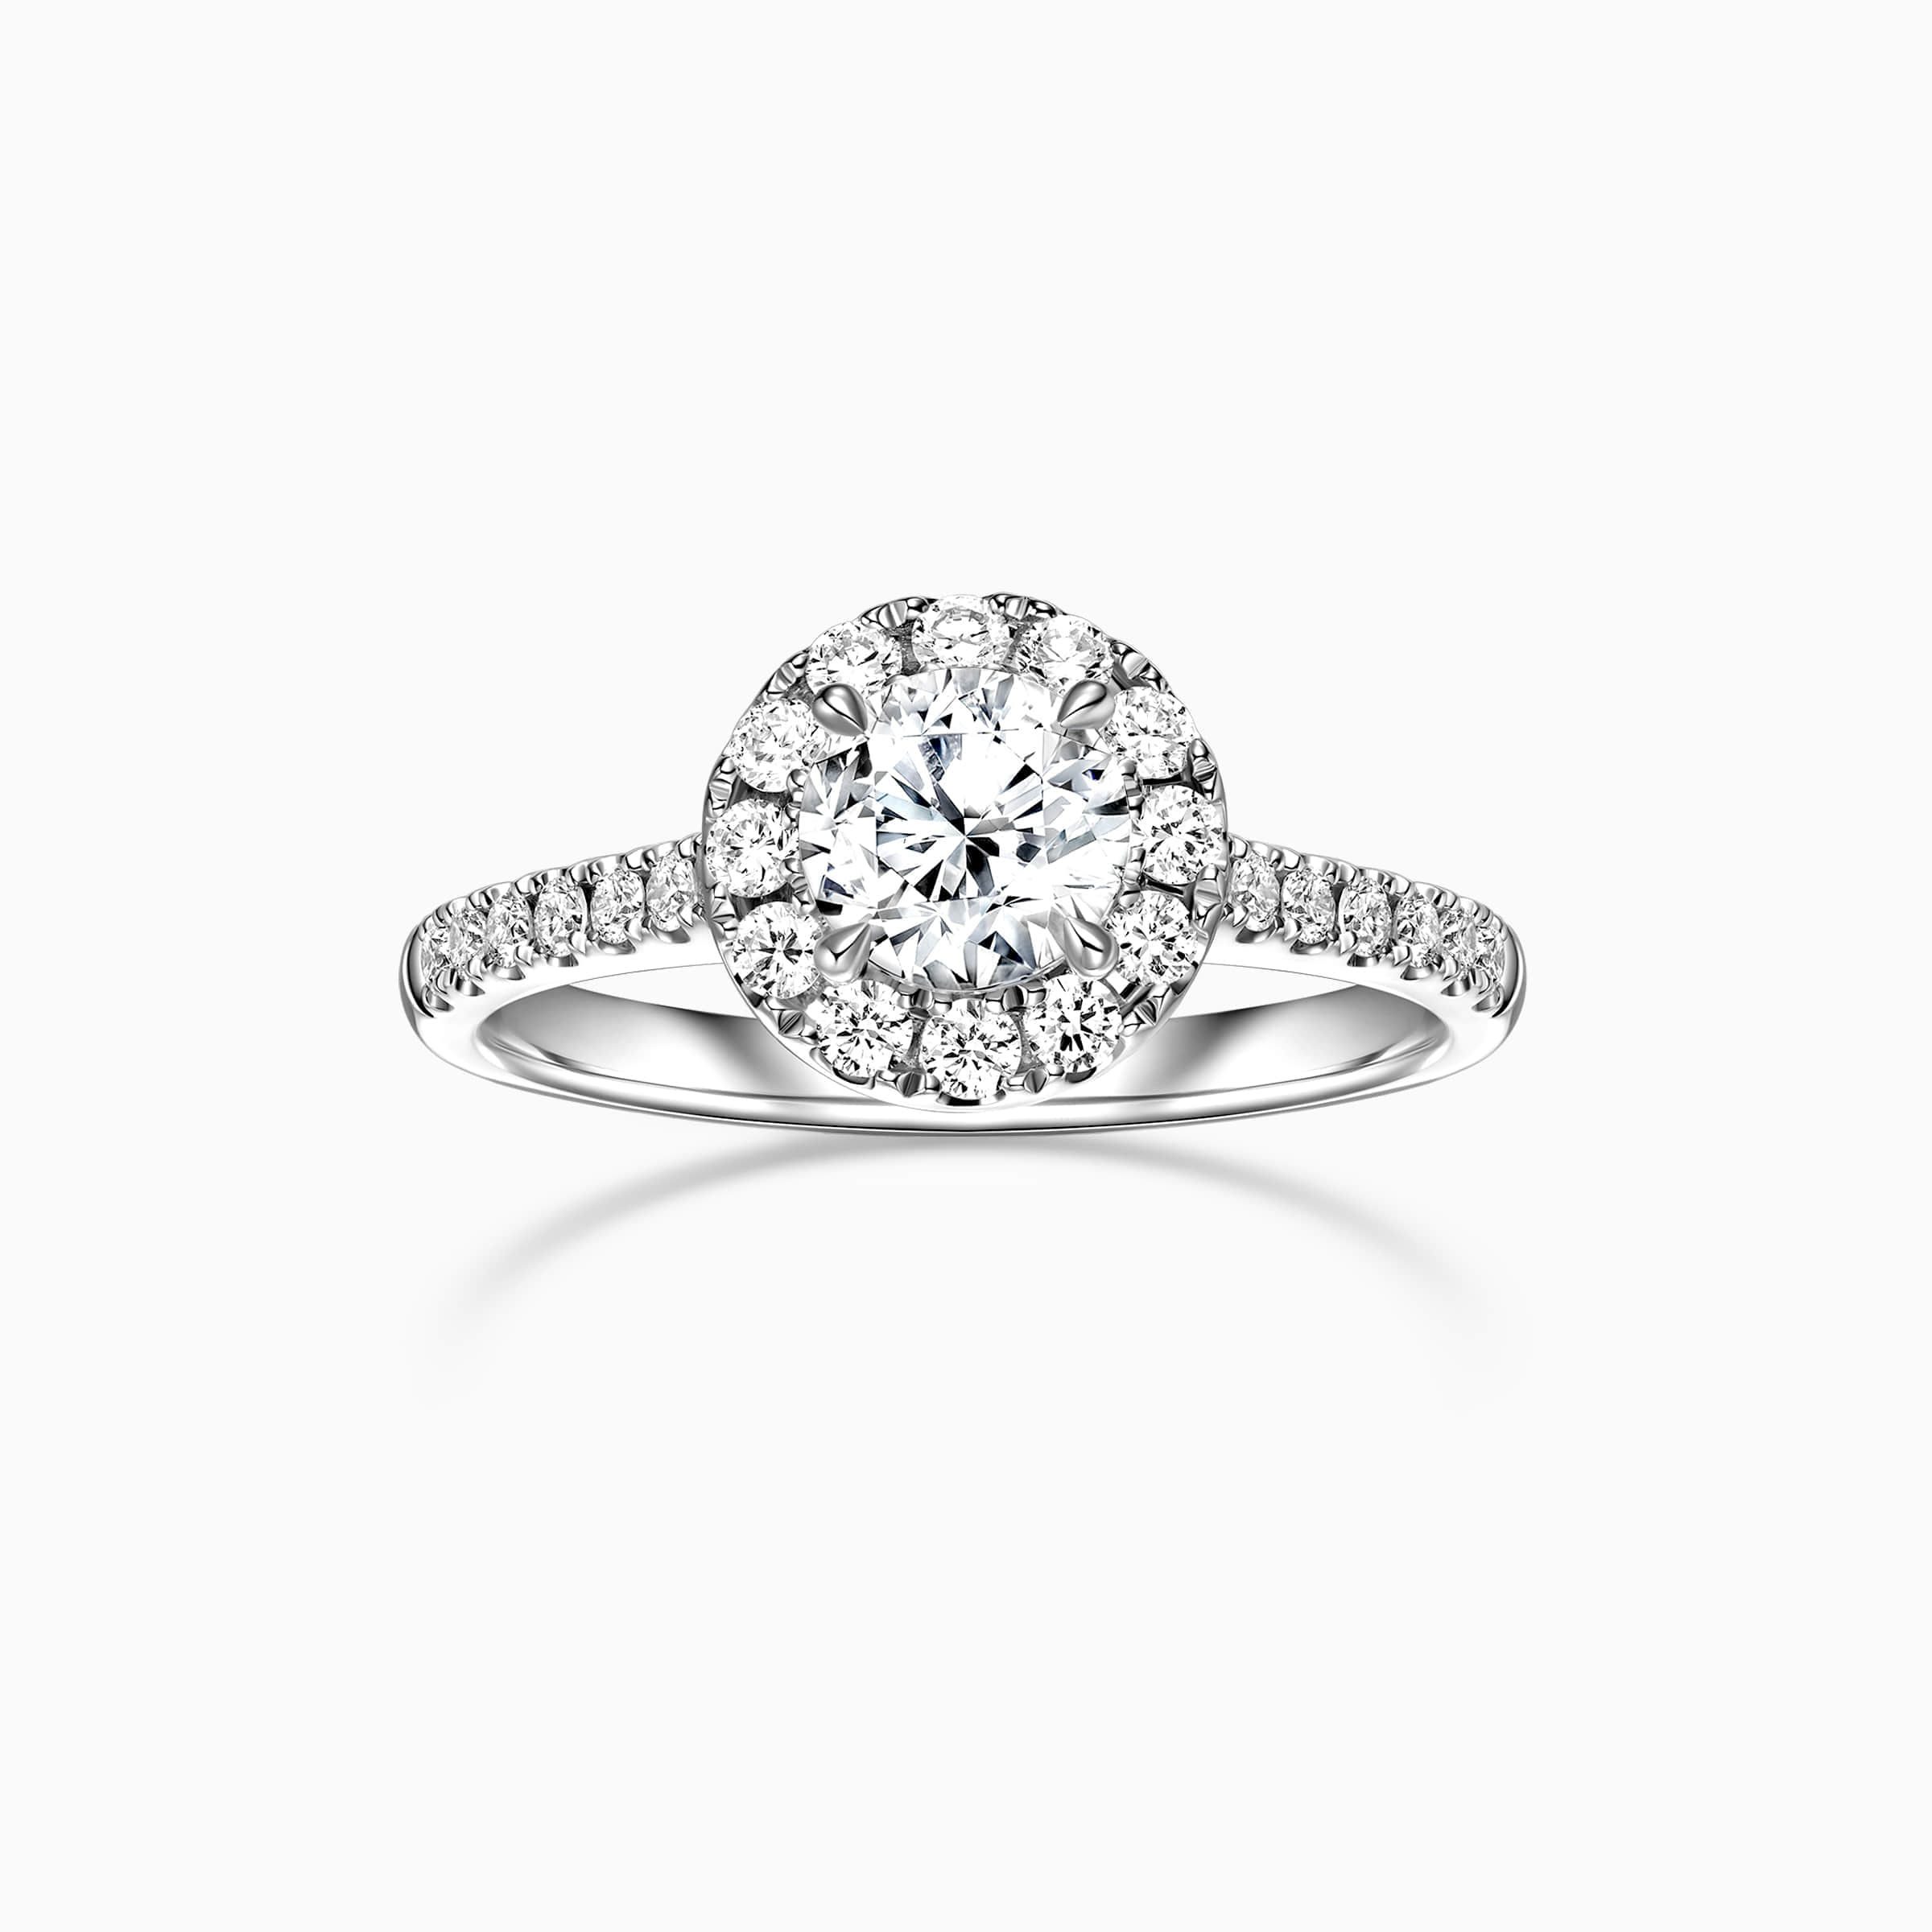 Darry Ring round halo engagement ring white gold